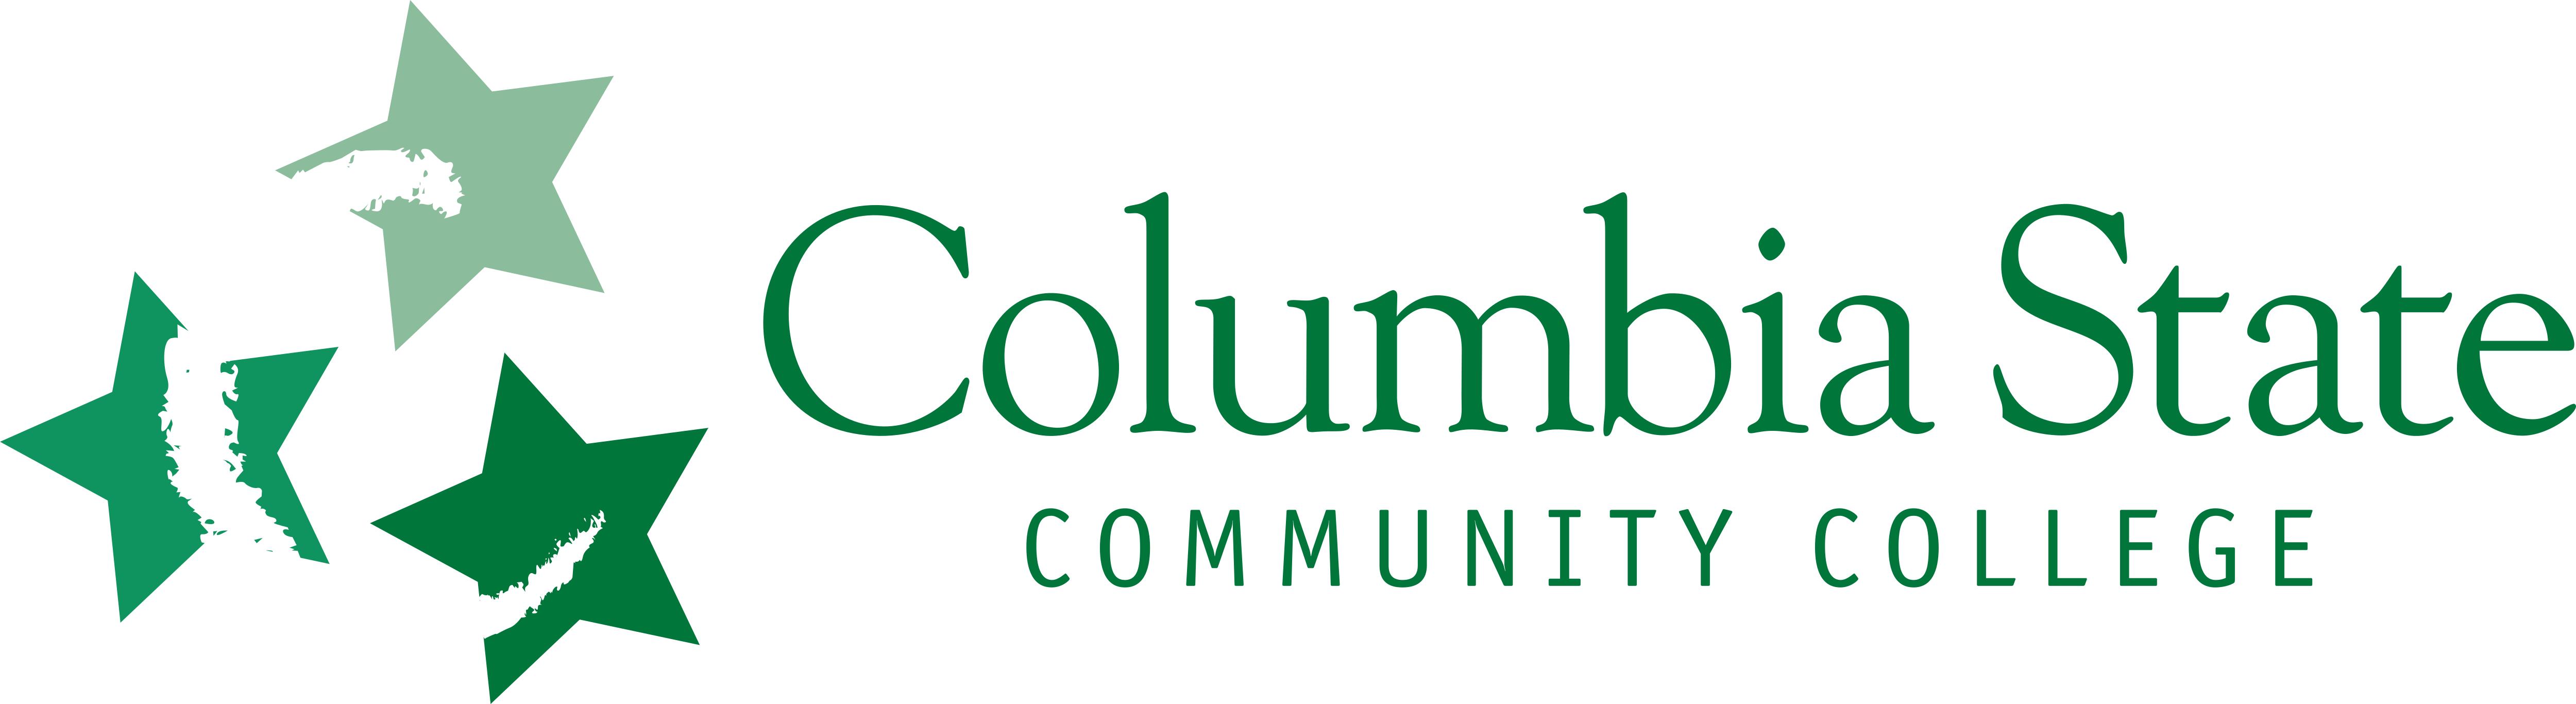 columbia-state-community-college-logos-download